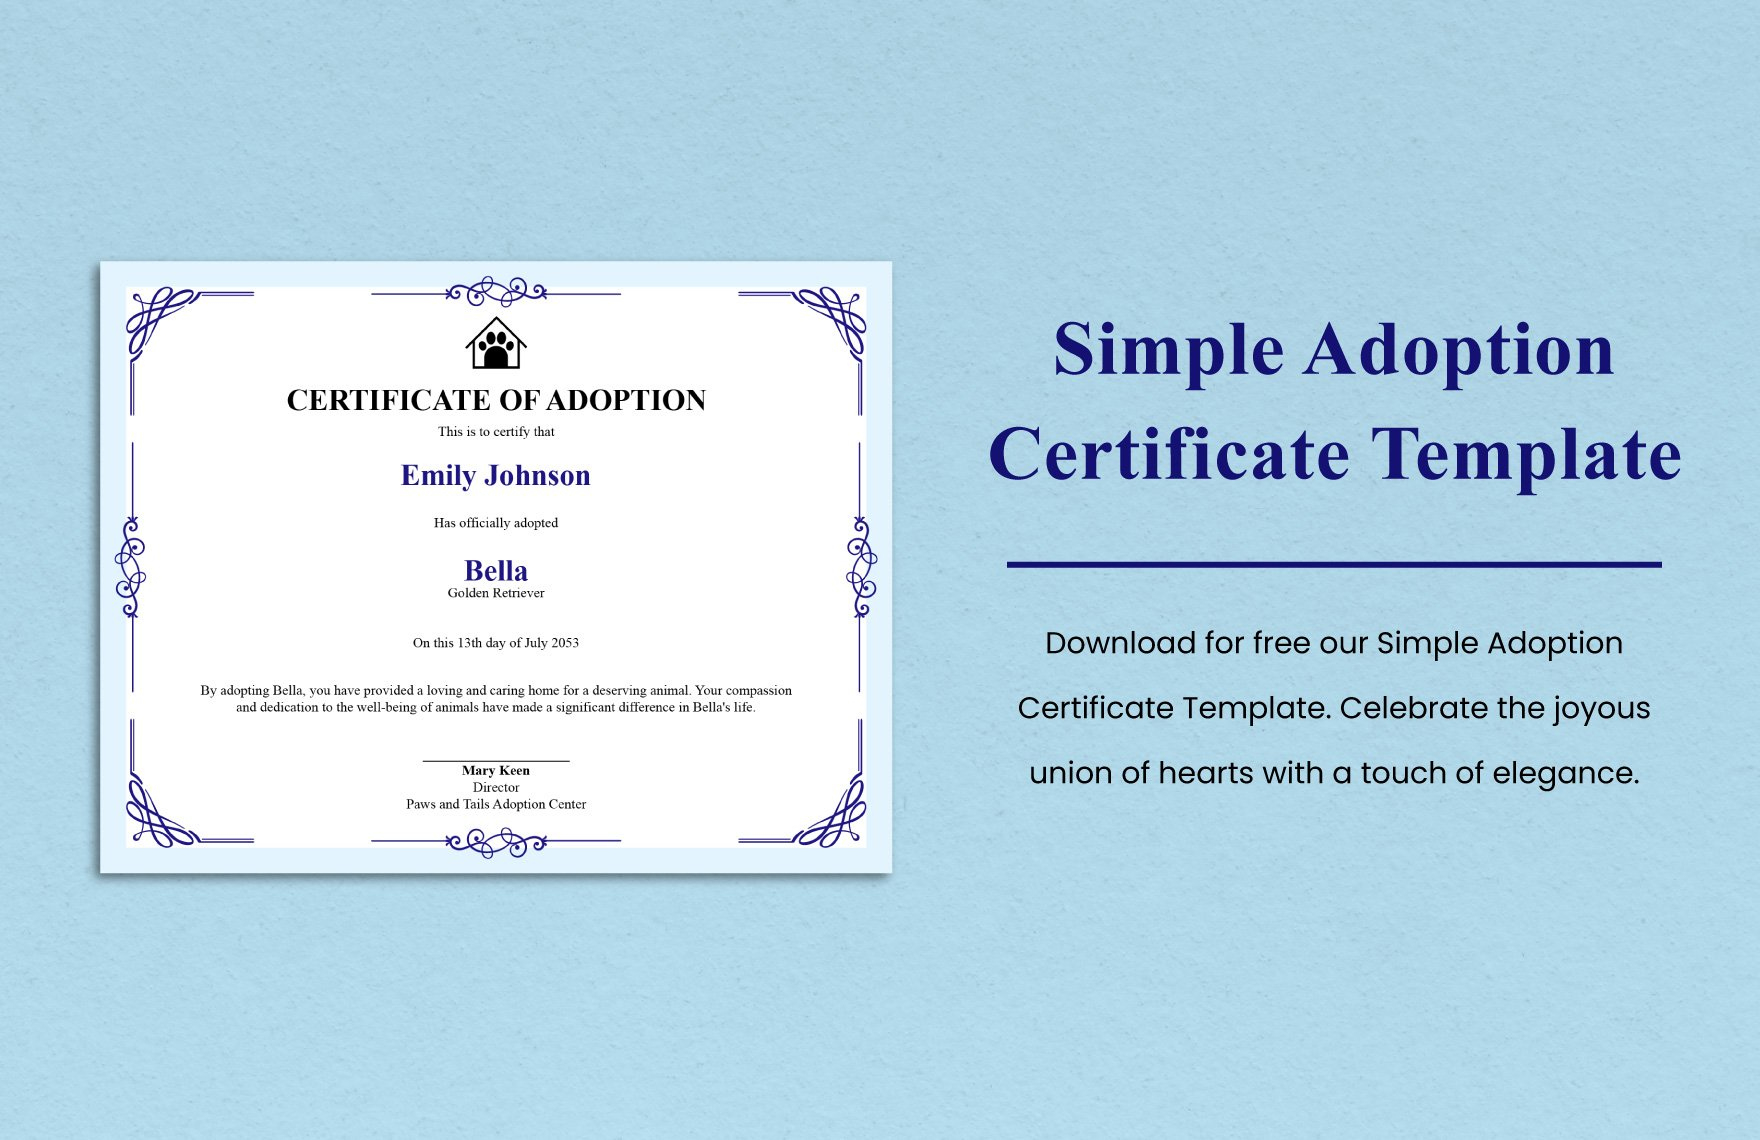 Simple Adoption Certificate Template In Word, Illustrator, Psd in Free Printable Adoption Certificate